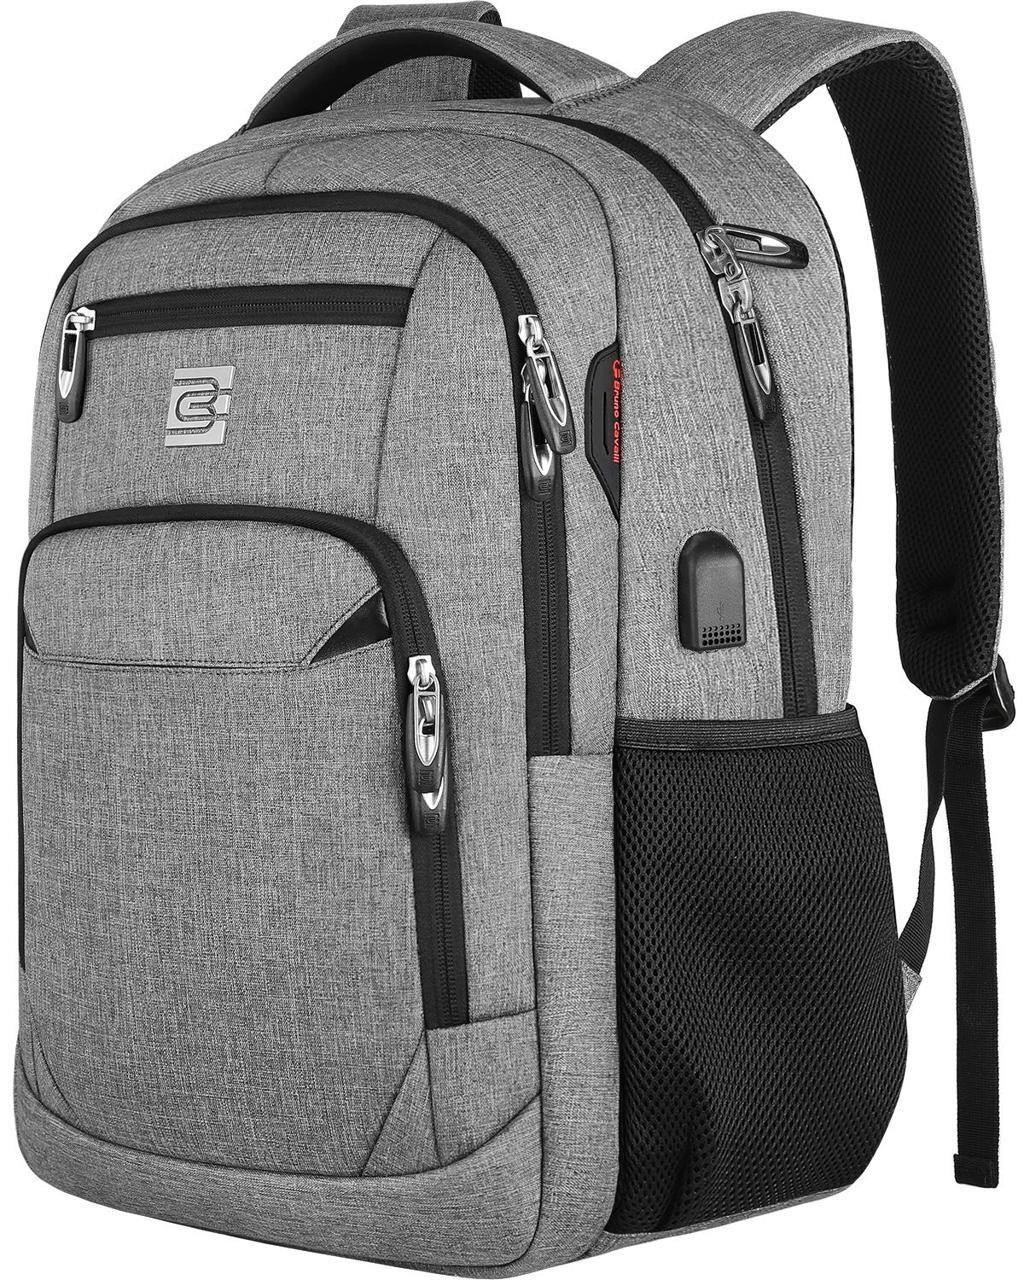 Laptop Backpack,Business Travel Anti Theft Slim